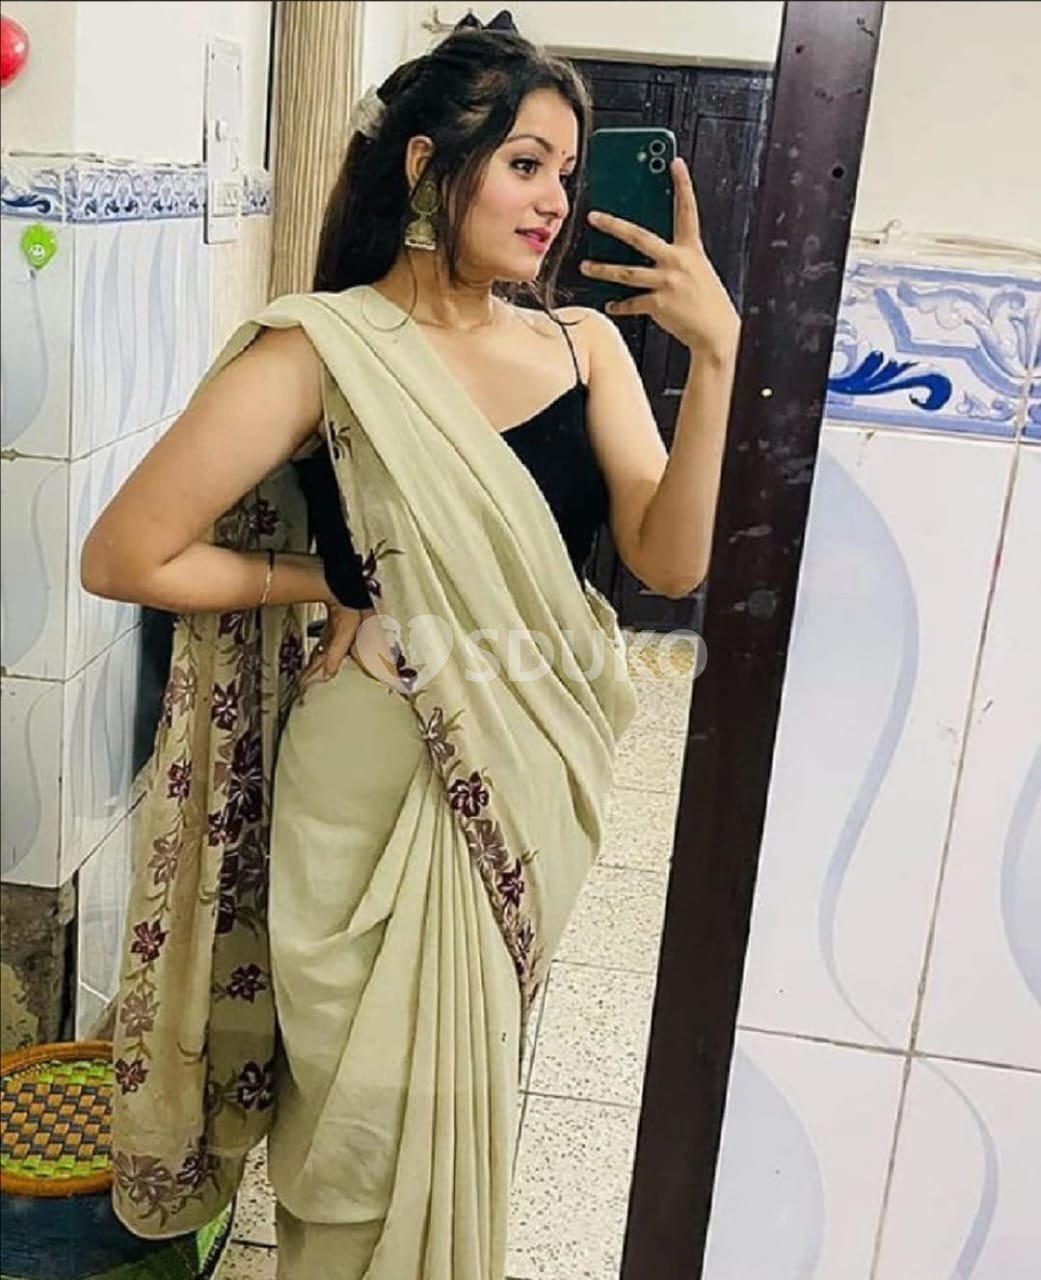 🔥🔥 THE_ROYAL ESCORT AHMEDABAD_❣️ HARD SEX DOORSTEP OUT CALL IN CALL GIRLS AND HOUSE WIFE _25